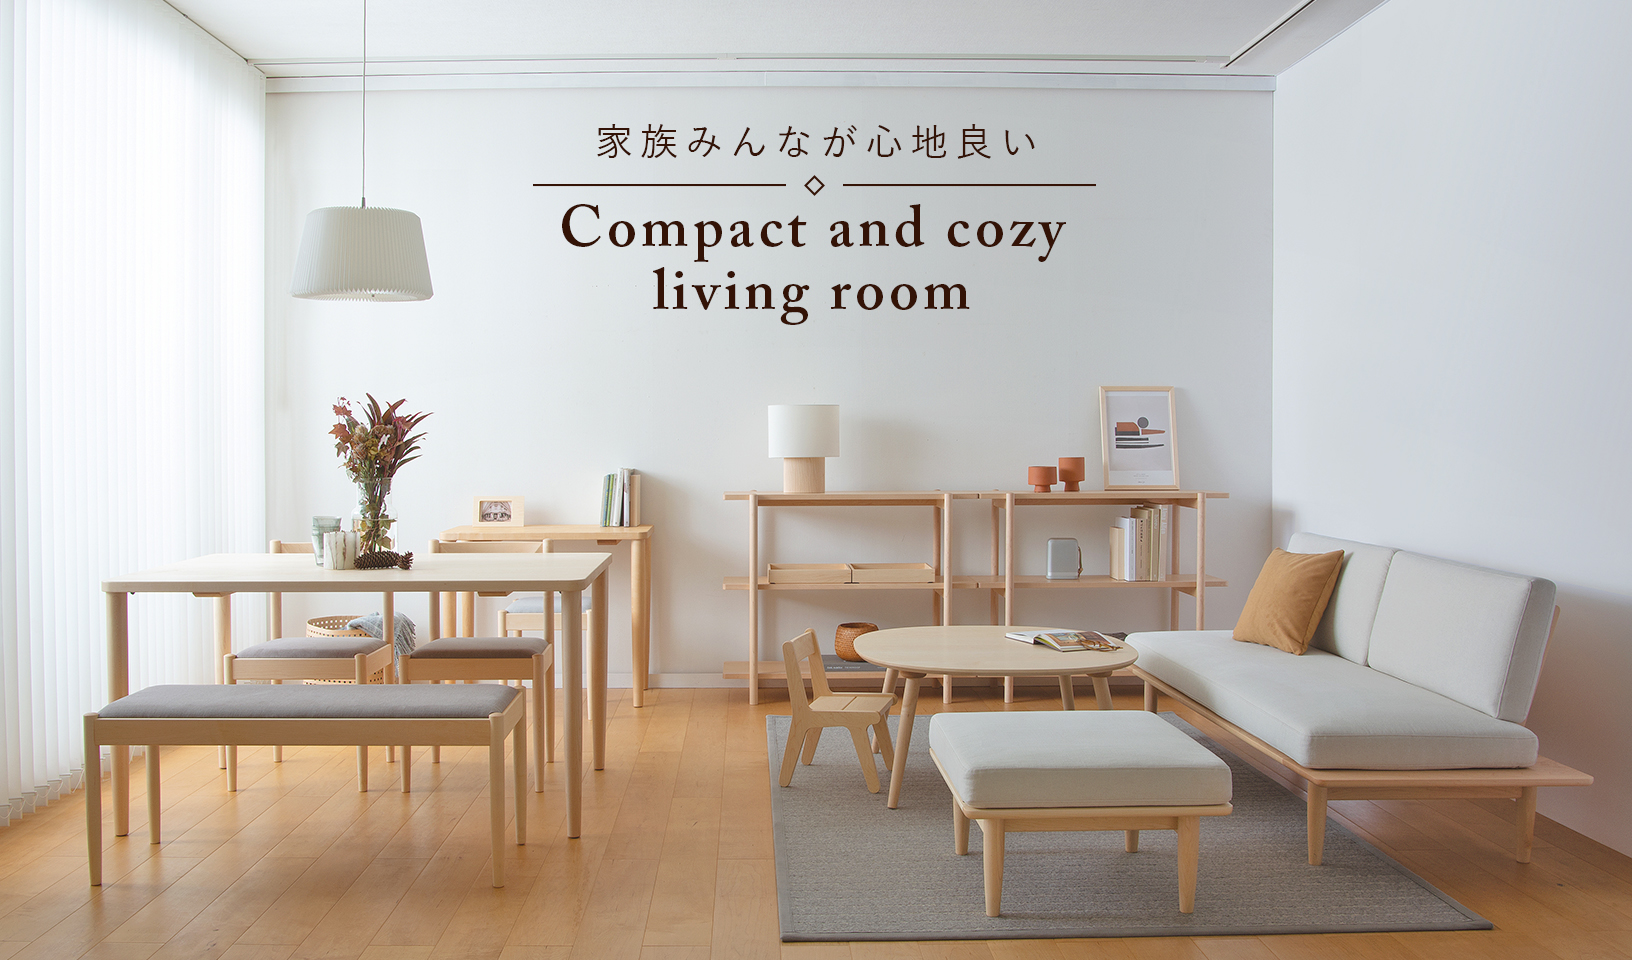 Compact and cozy living room - Comfortable for the whole family